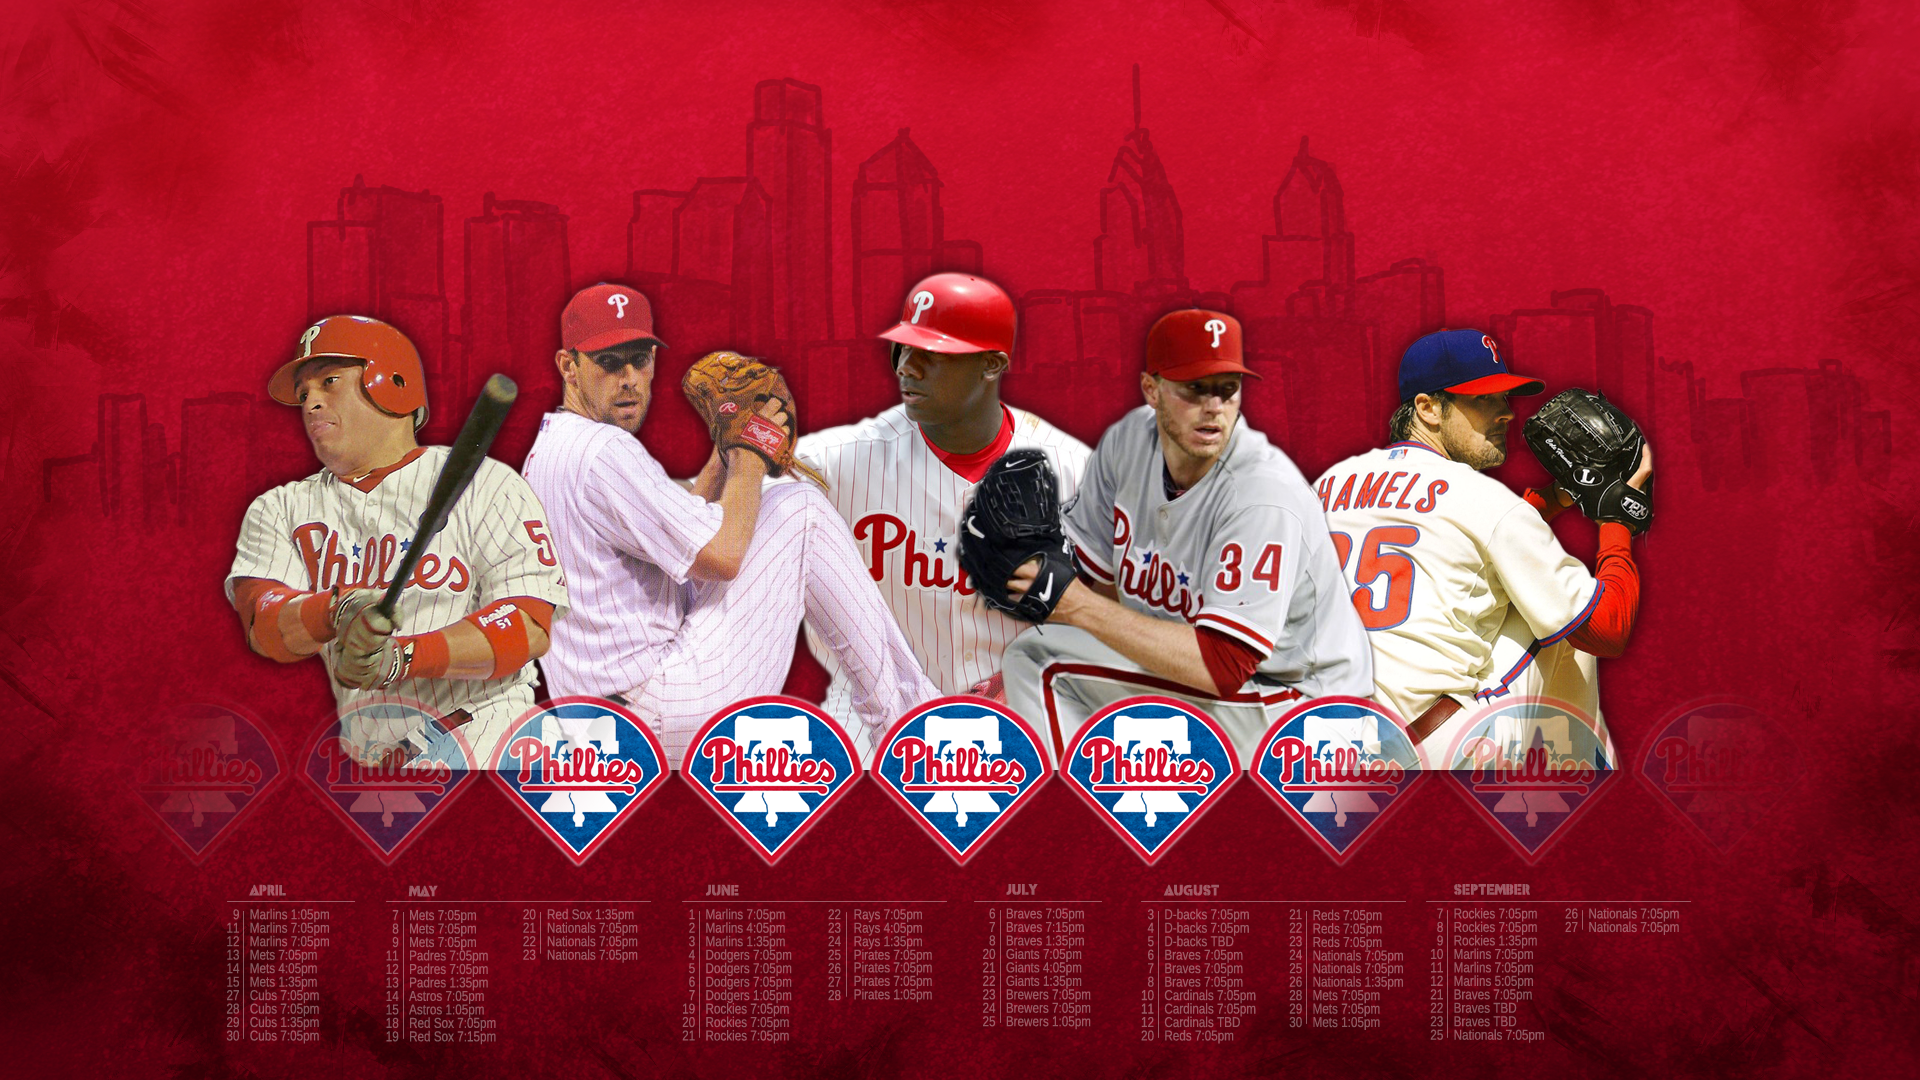 Philadelphia Phillies wallpaper by Densports  Download on ZEDGE  a76d